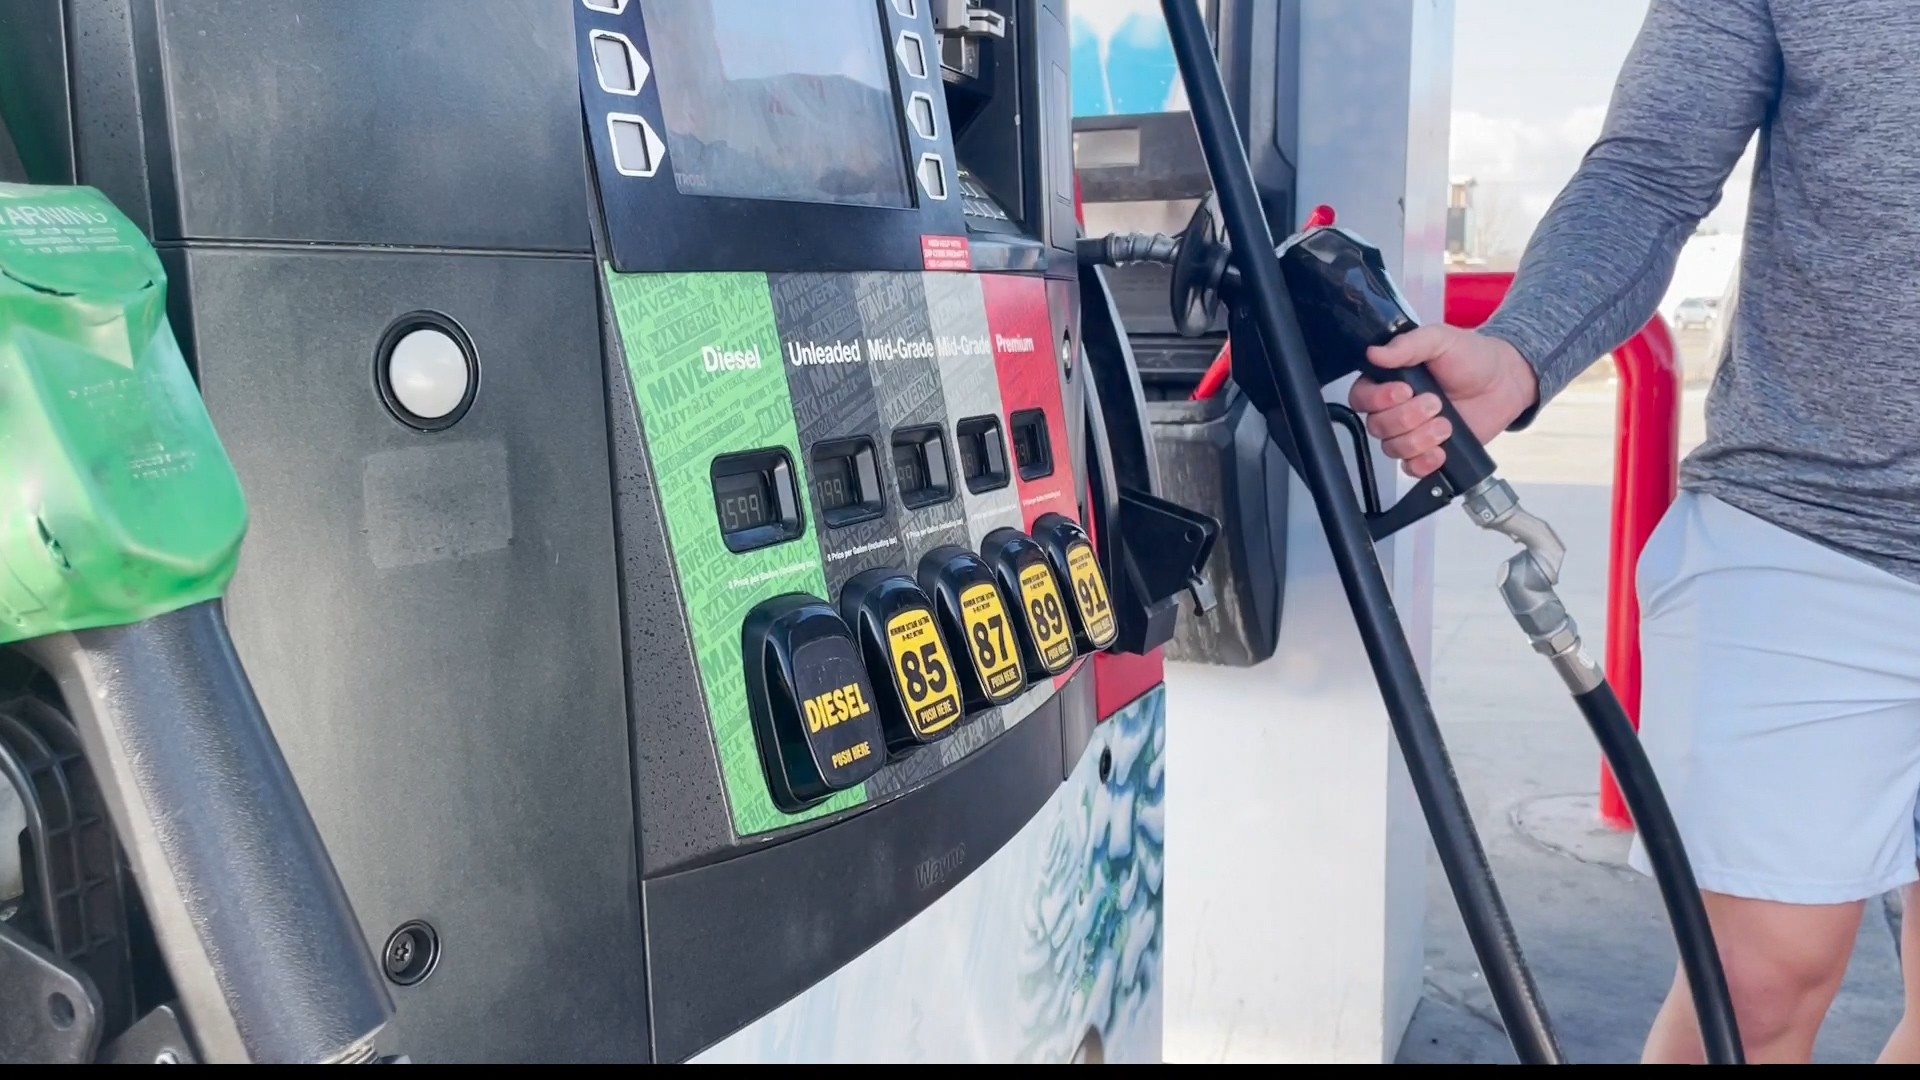 utah-gas-prices-escalate-to-record-high-the-daily-universe